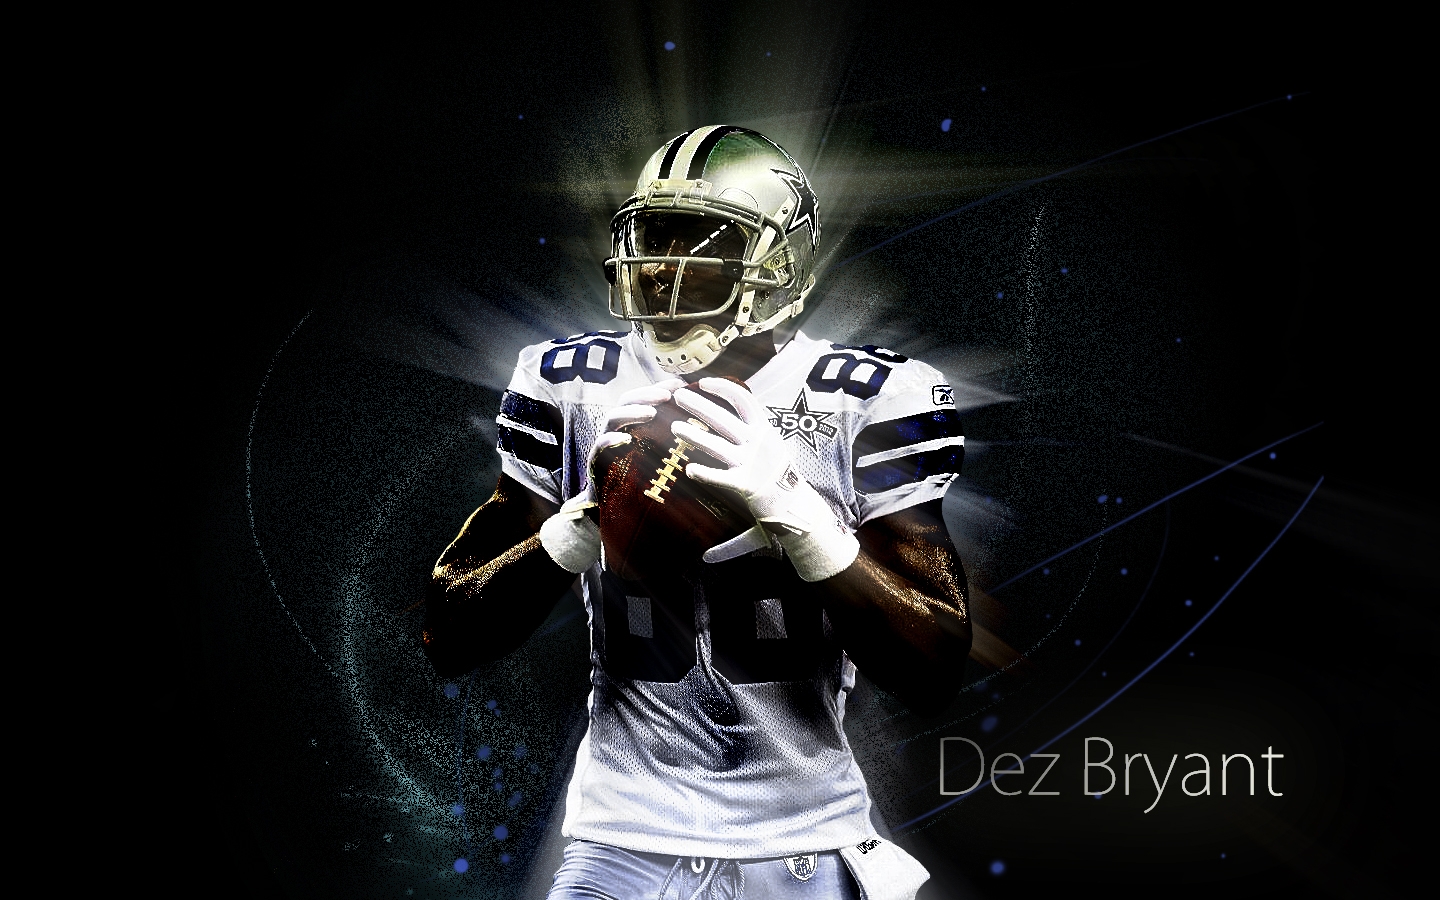 Of High Definition Dez Bryant Wallpaper Picture Image And